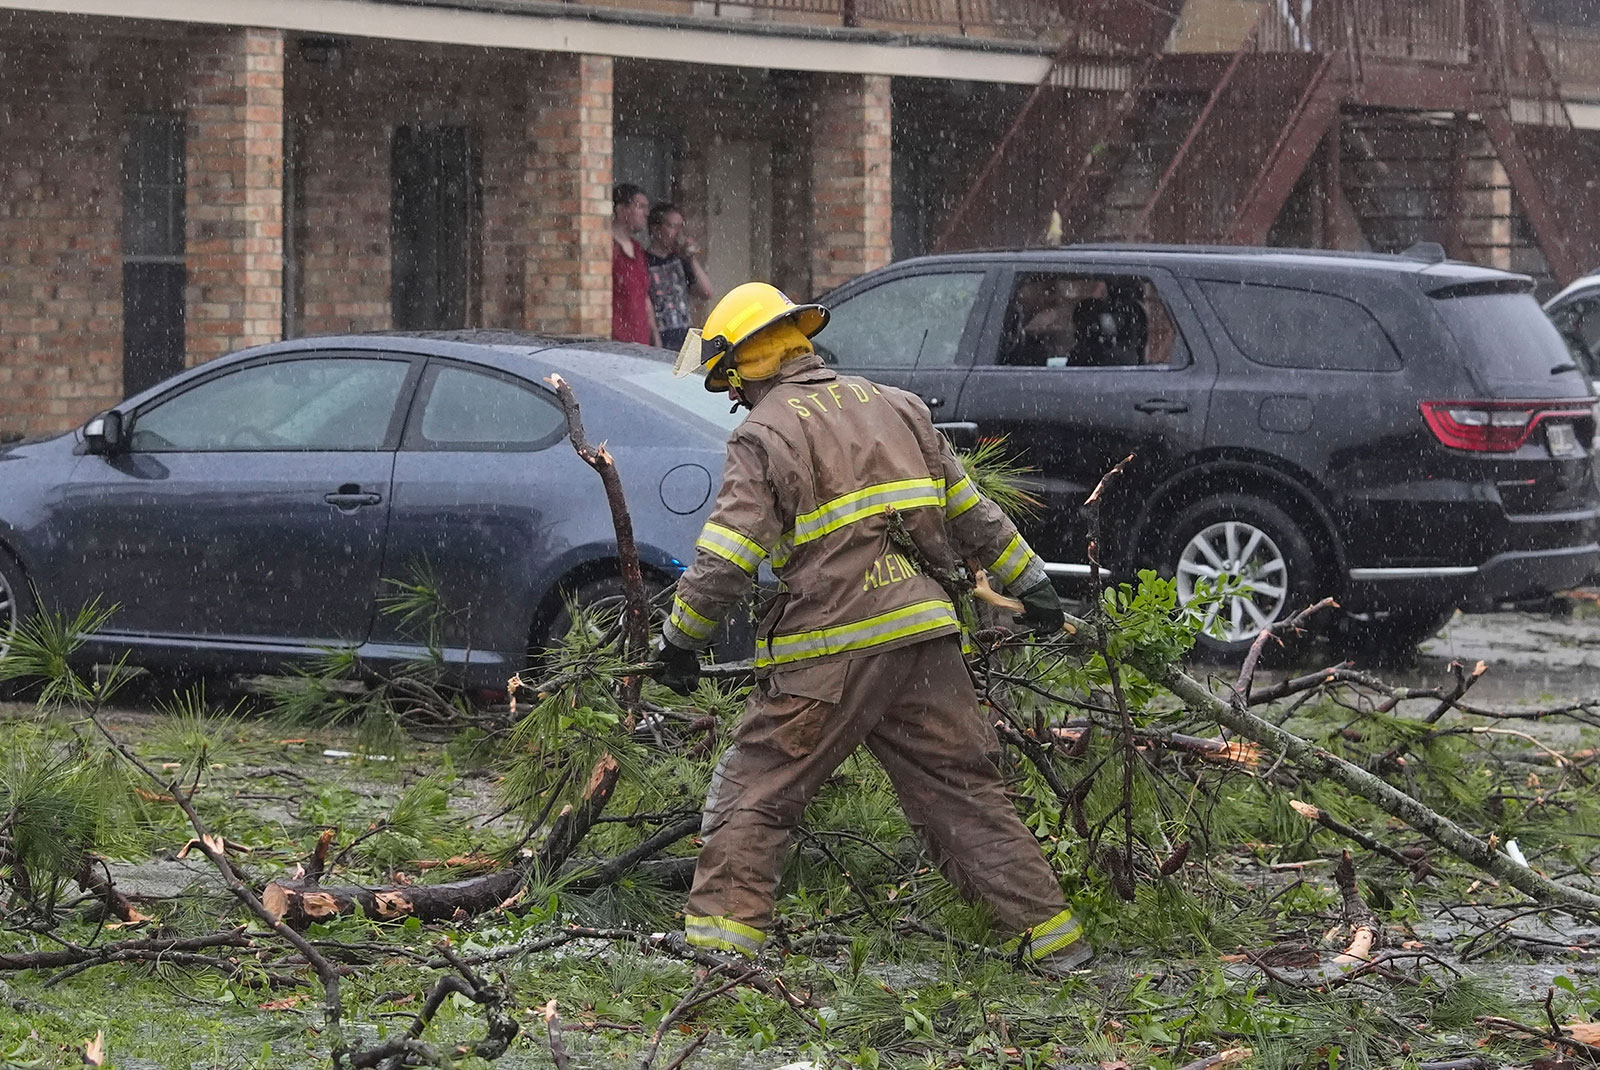 A firefighter clears debris in the aftermath of severe storms that swept through the region in Slidell, Louisiana, on Wednesday.